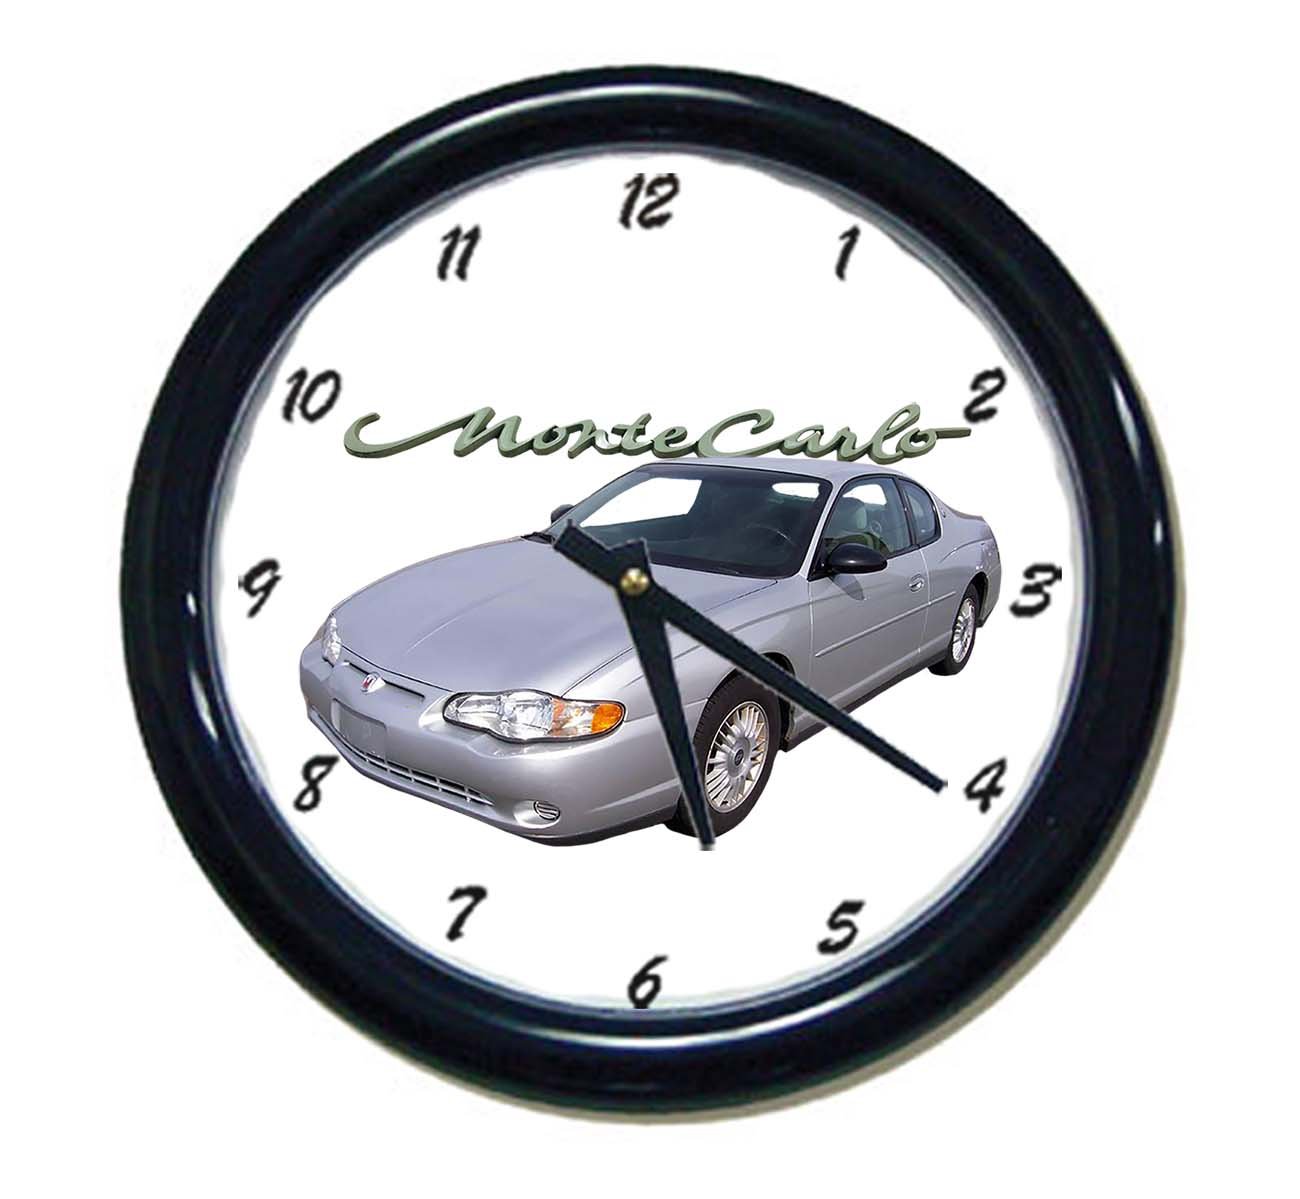 New 2002 Chevy Monte Carlo Wall Clock